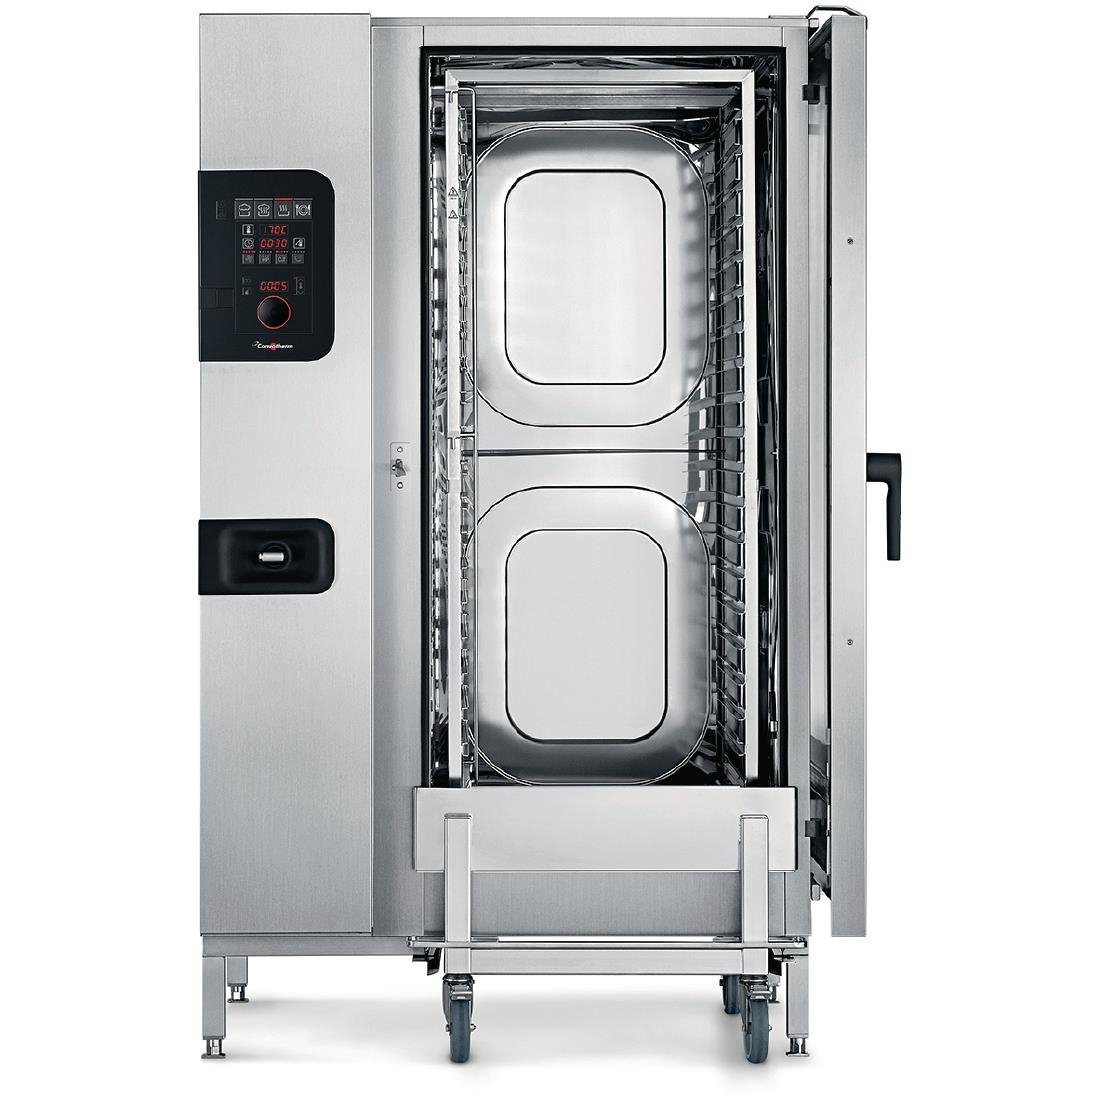 HC264-MO Convotherm 4 easyDial Combi Oven 20 x 2 x1 GN Grid with ConvoGrill JD Catering Equipment Solutions Ltd